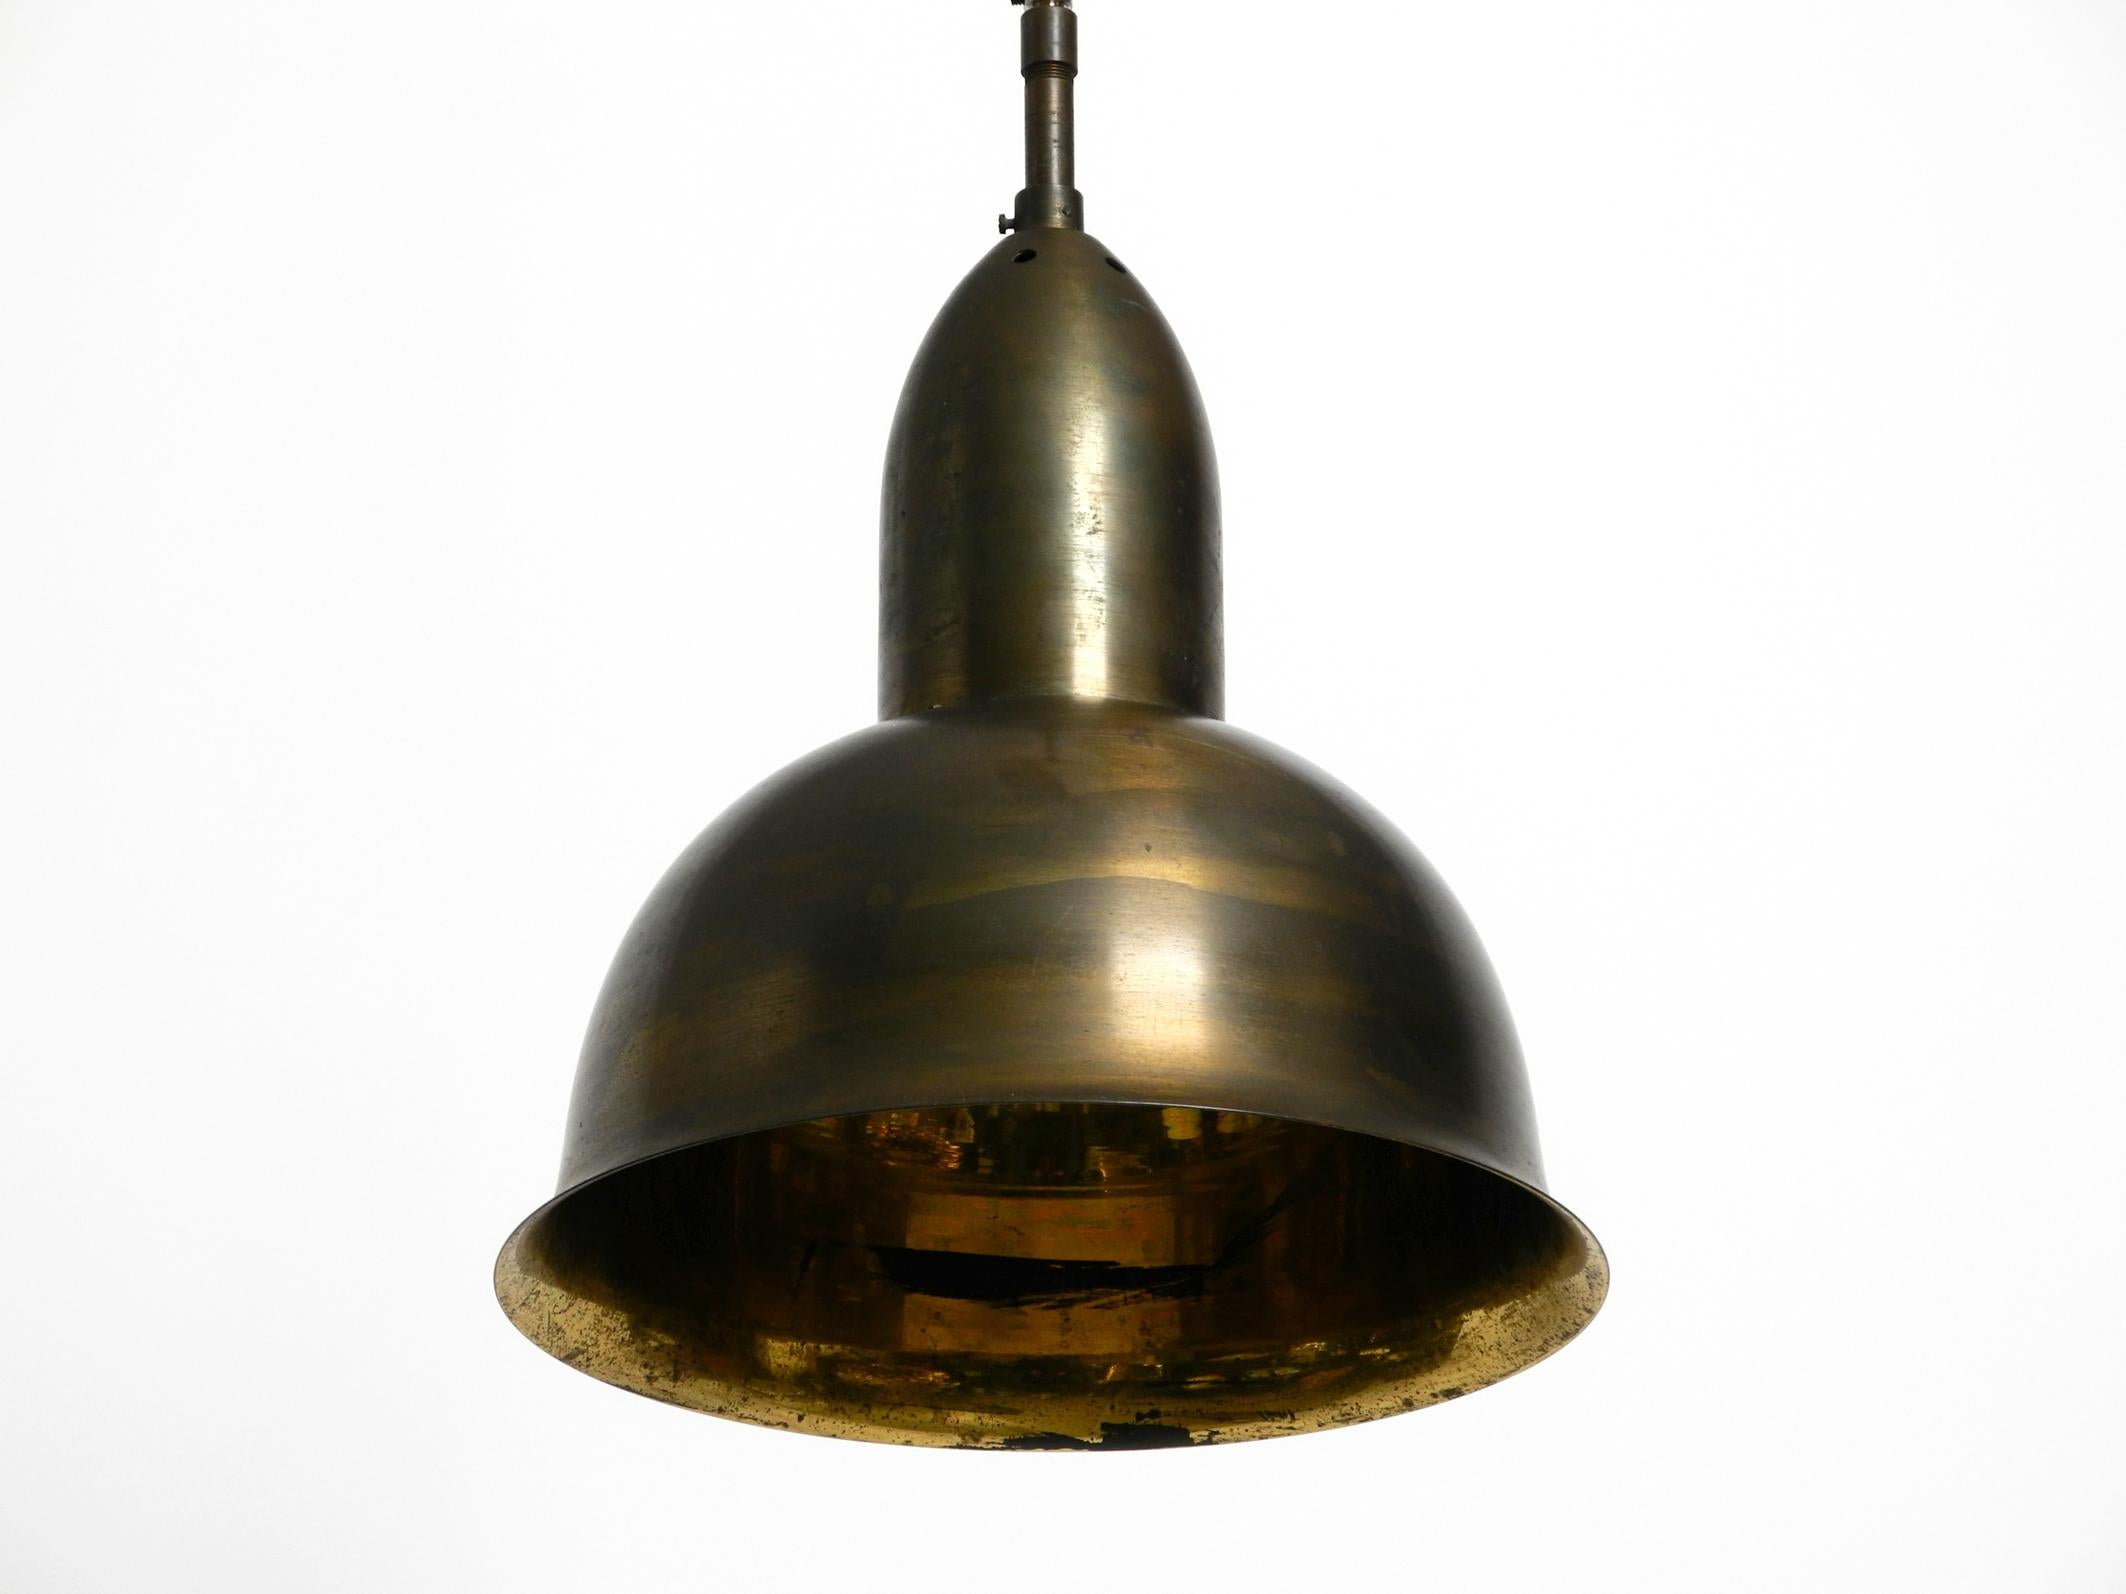 Beautiful original mid century brass pendant lamp.
This lamp hung in a German church for over half a century. 
Brass shade and socket.
100% original and fully functional.
One E27 socket for up to 100W.
Rewired due to age and with new metal